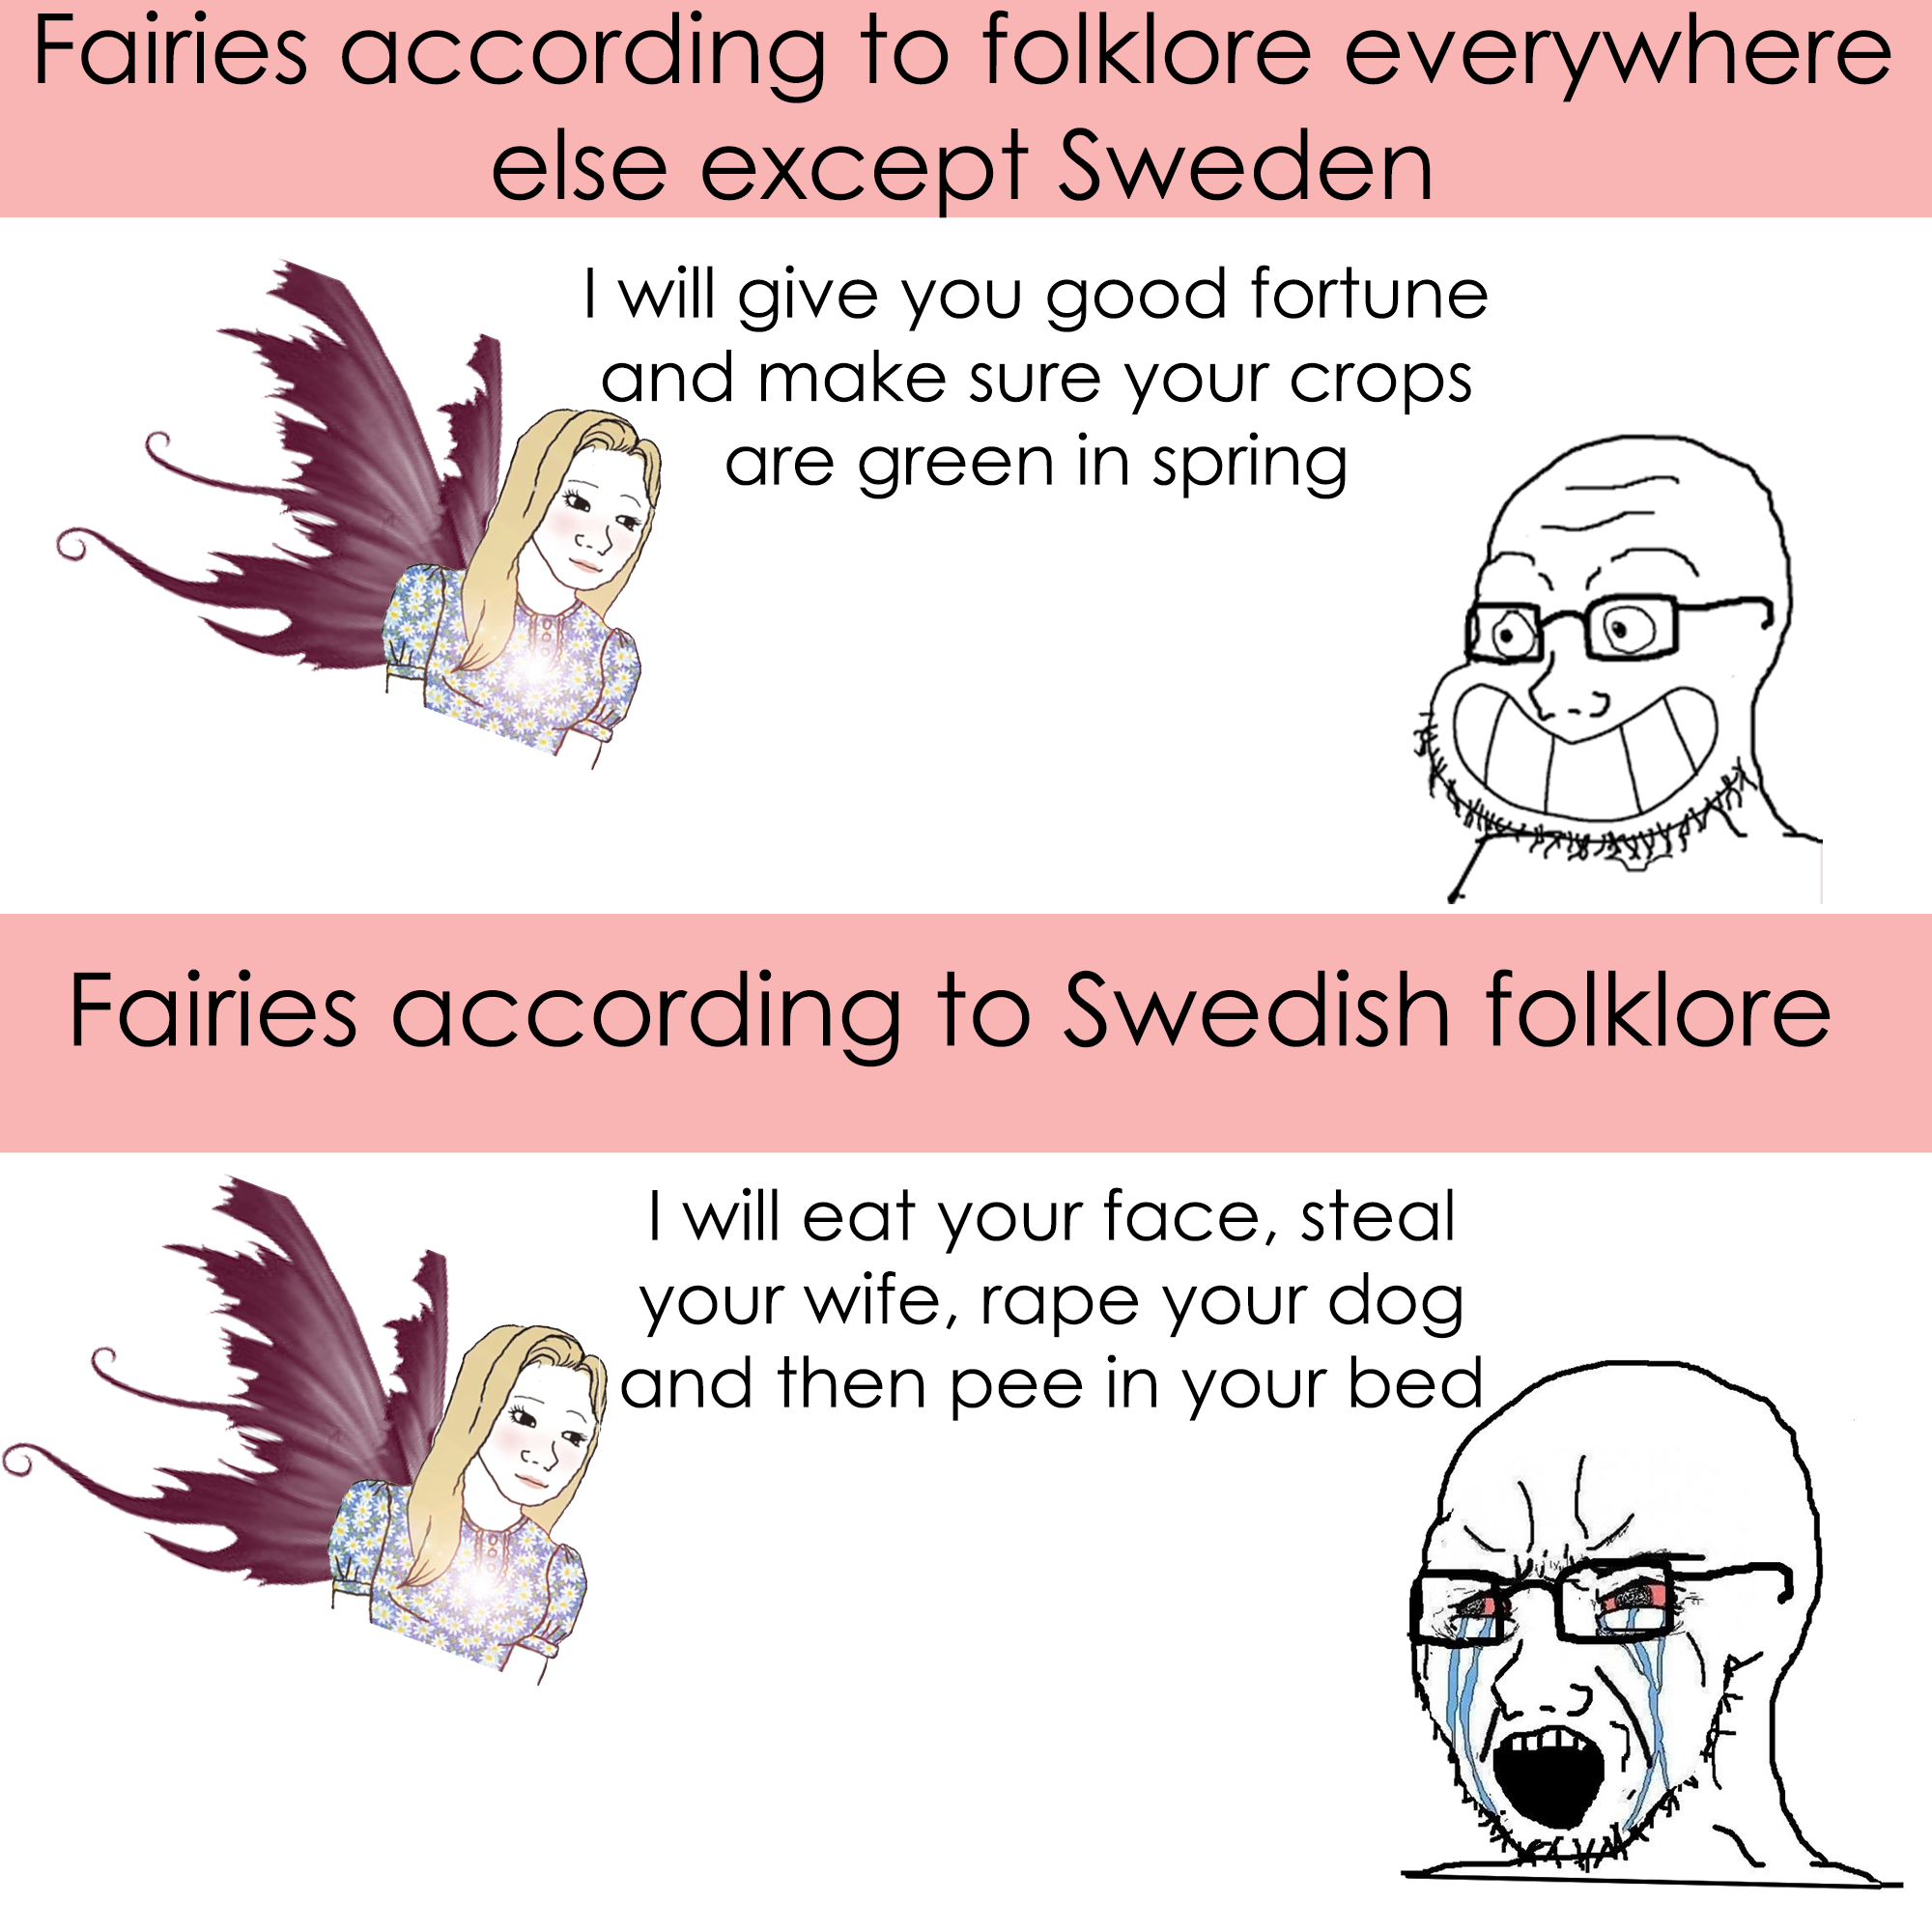 According to our mythology of course, because fairies aren't real... Right guys?